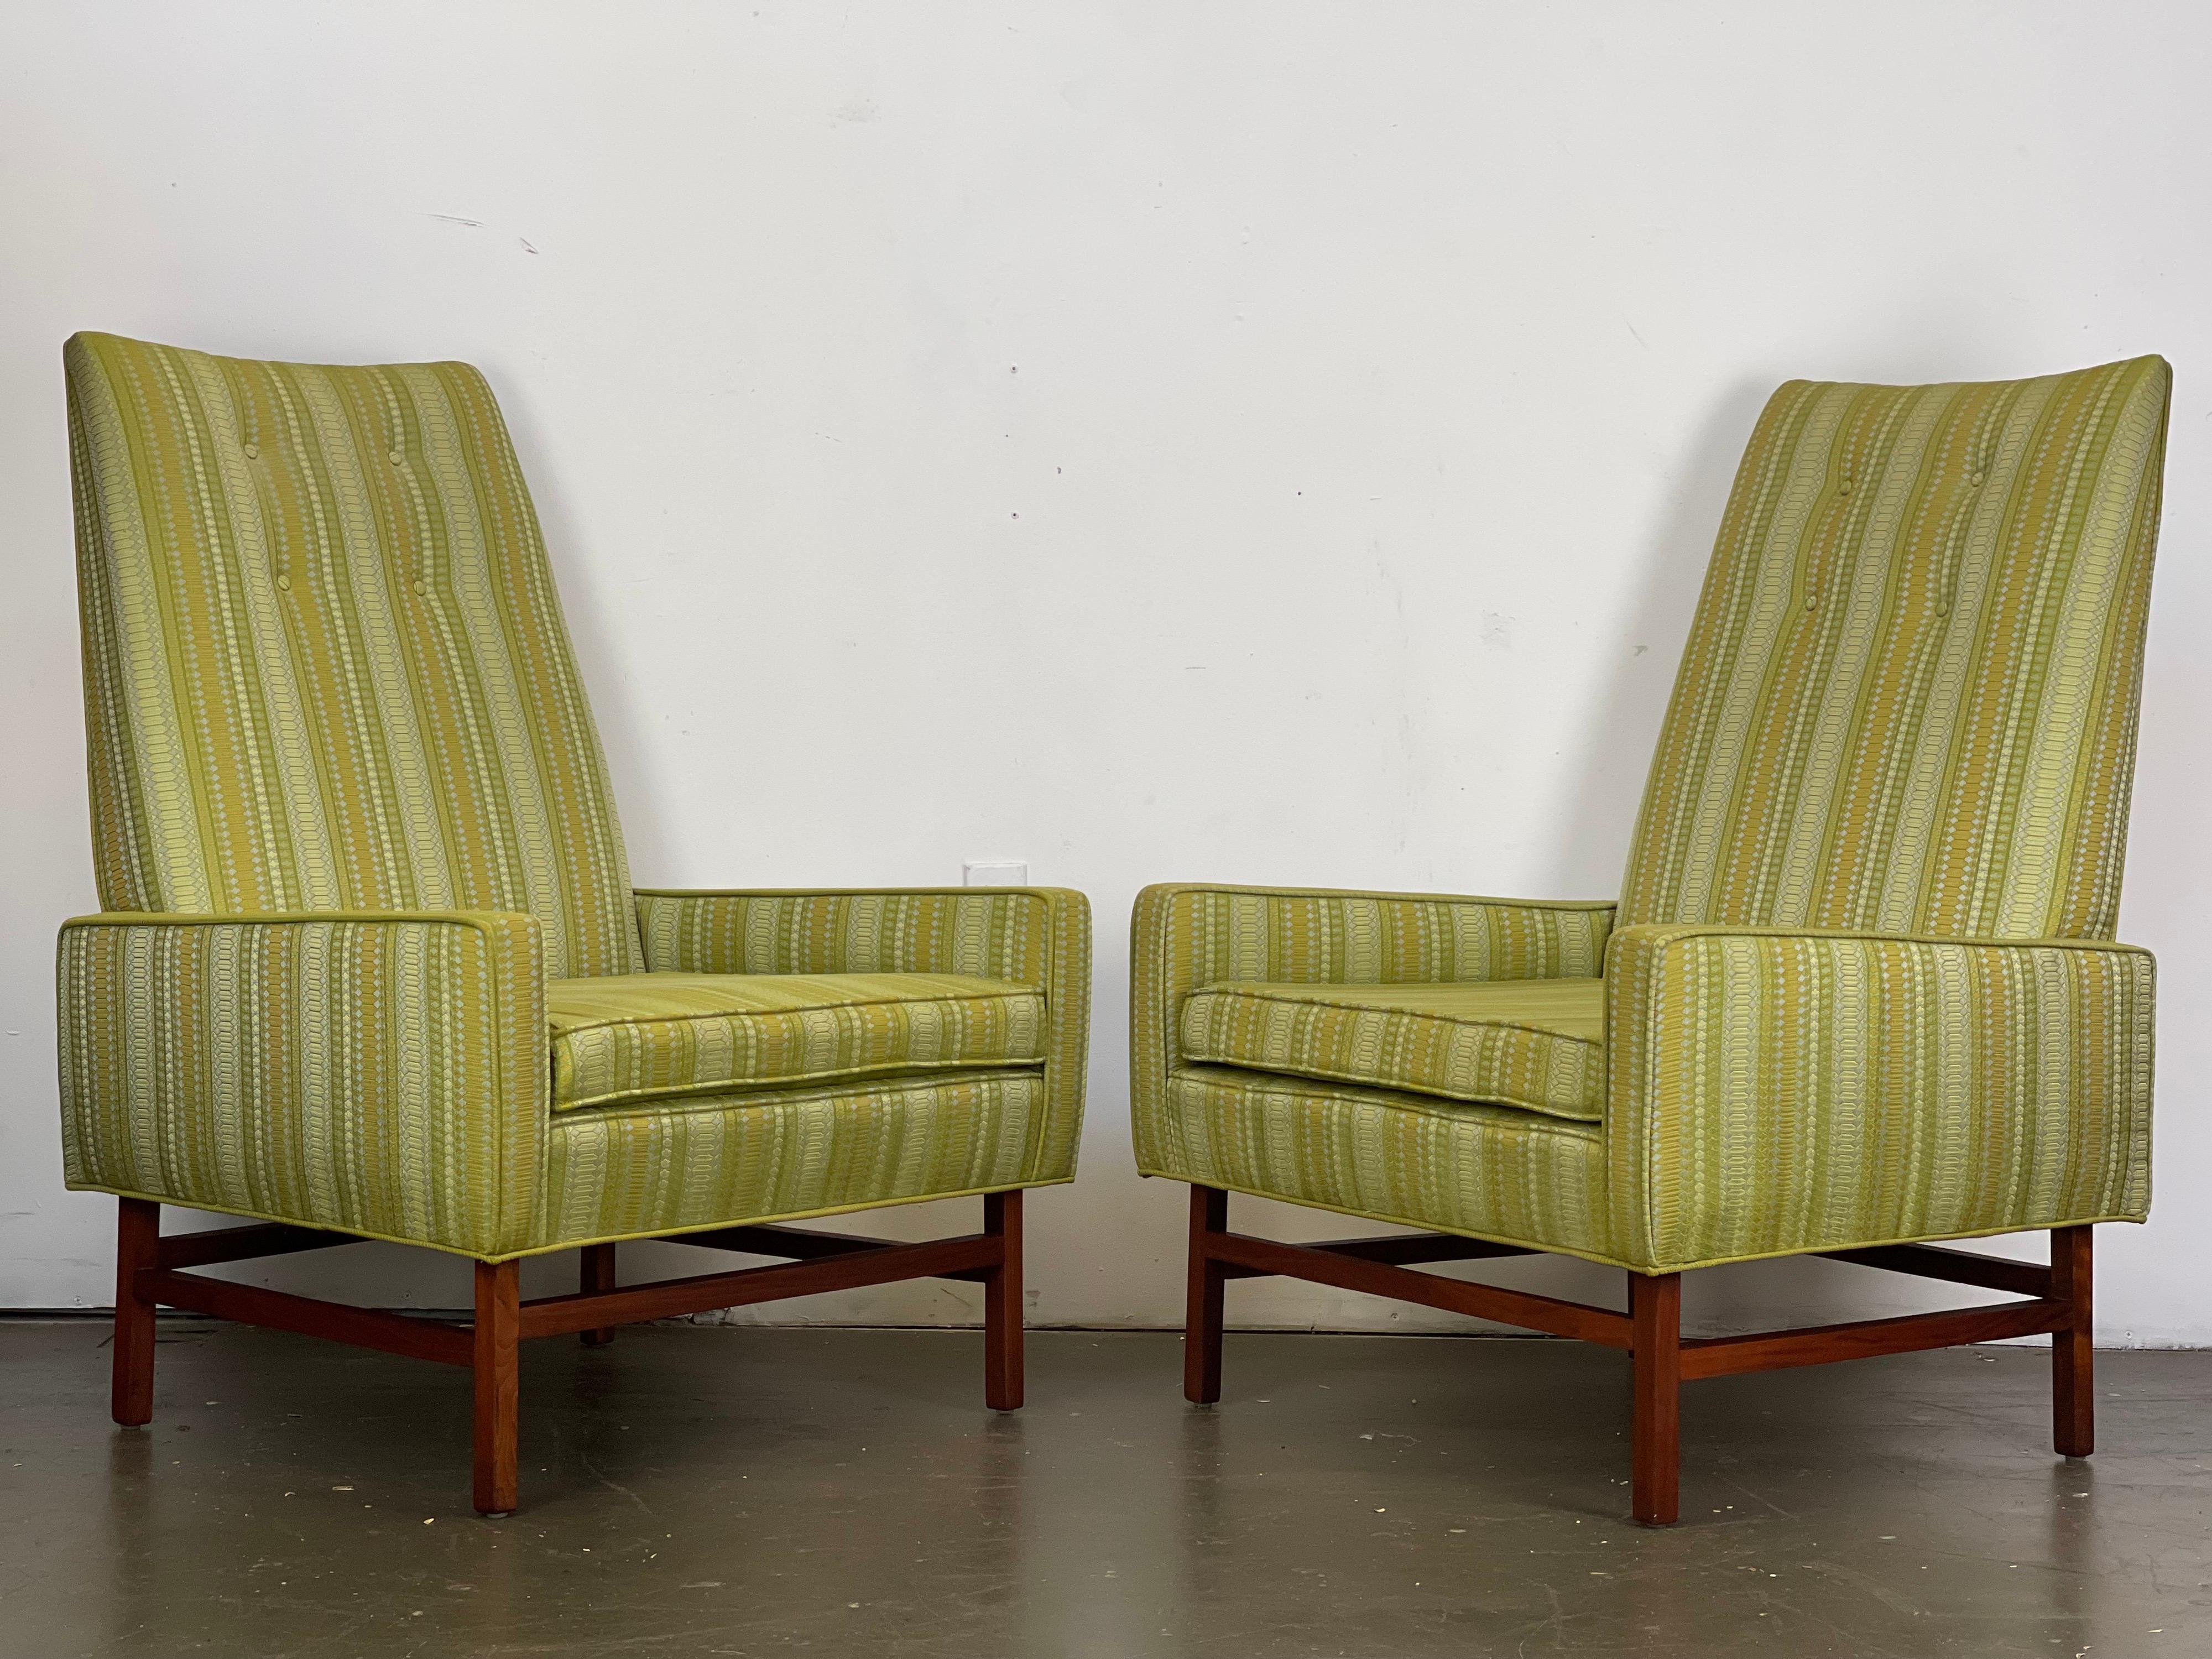 Throne Chairs in Alexander Girard Fabric by Edward Axel Roffman for B. Altman's  10